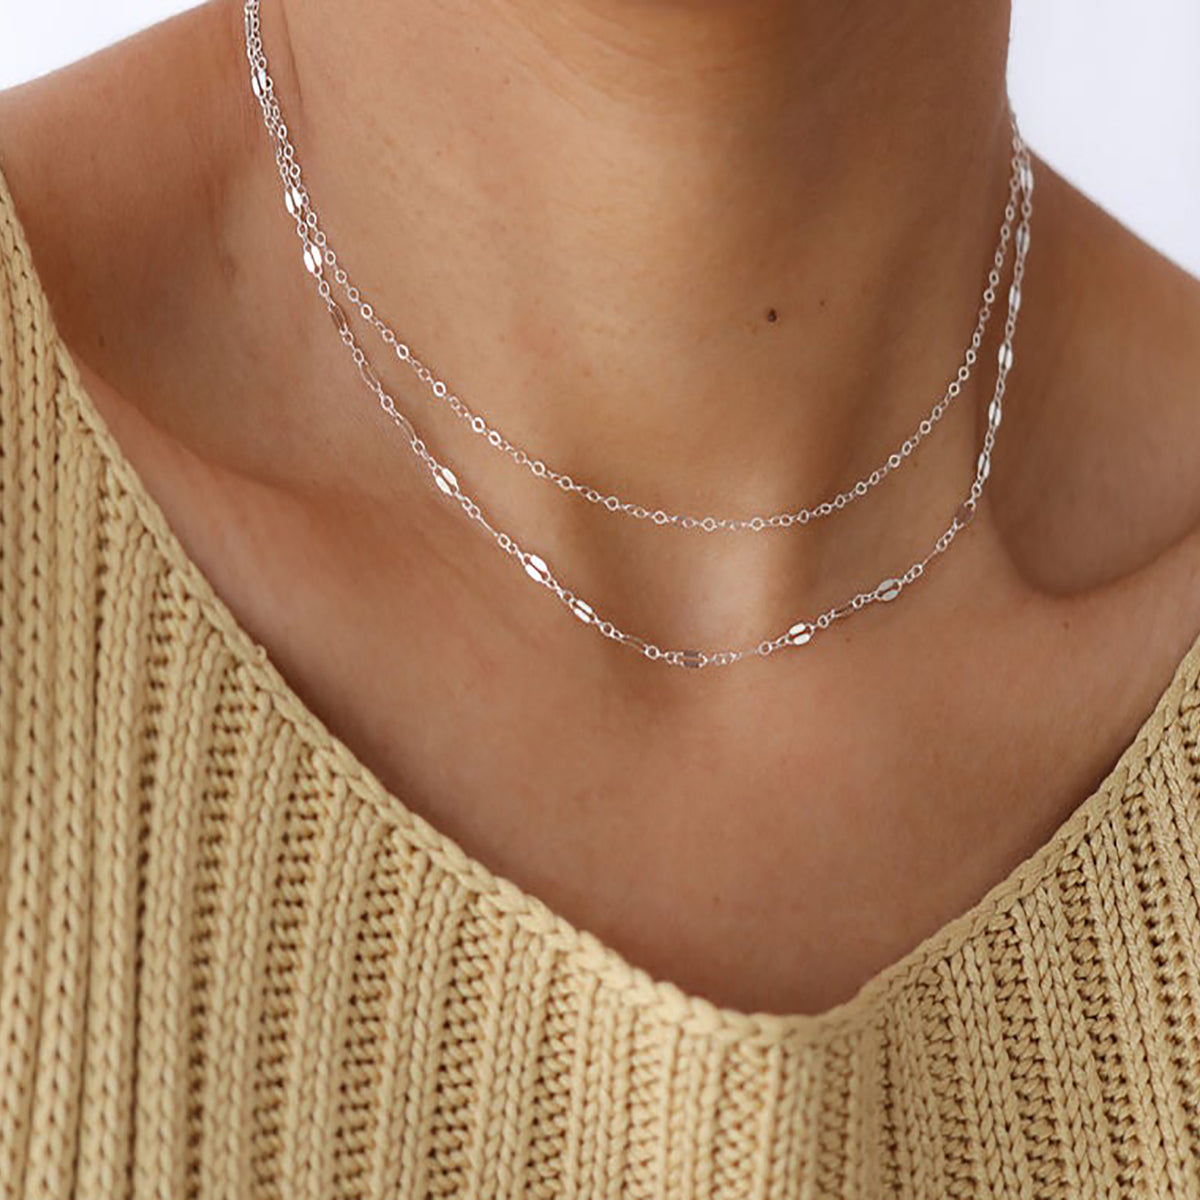 TASISO Gold Lace Chain Necklace Lip Chain Long Necklace